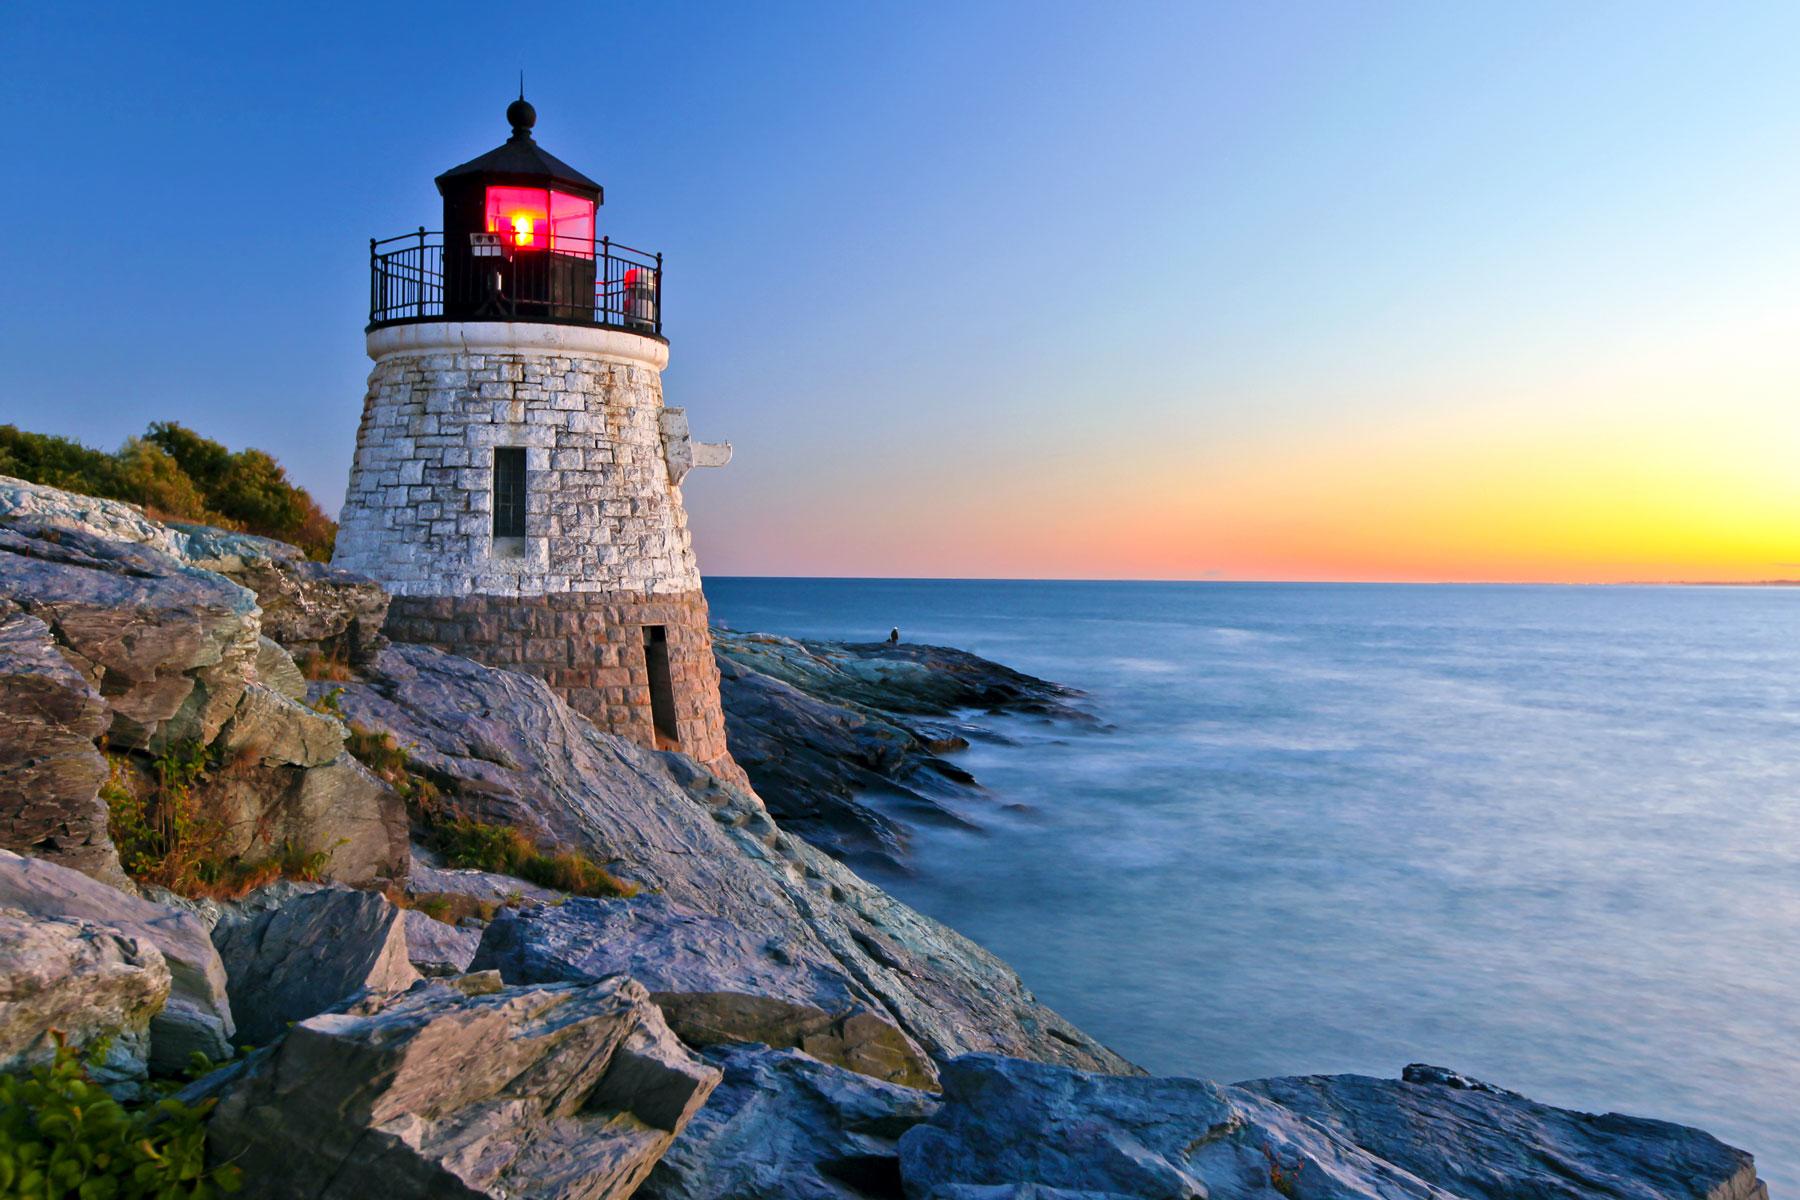 Most Beautiful Towns To Visit In New England